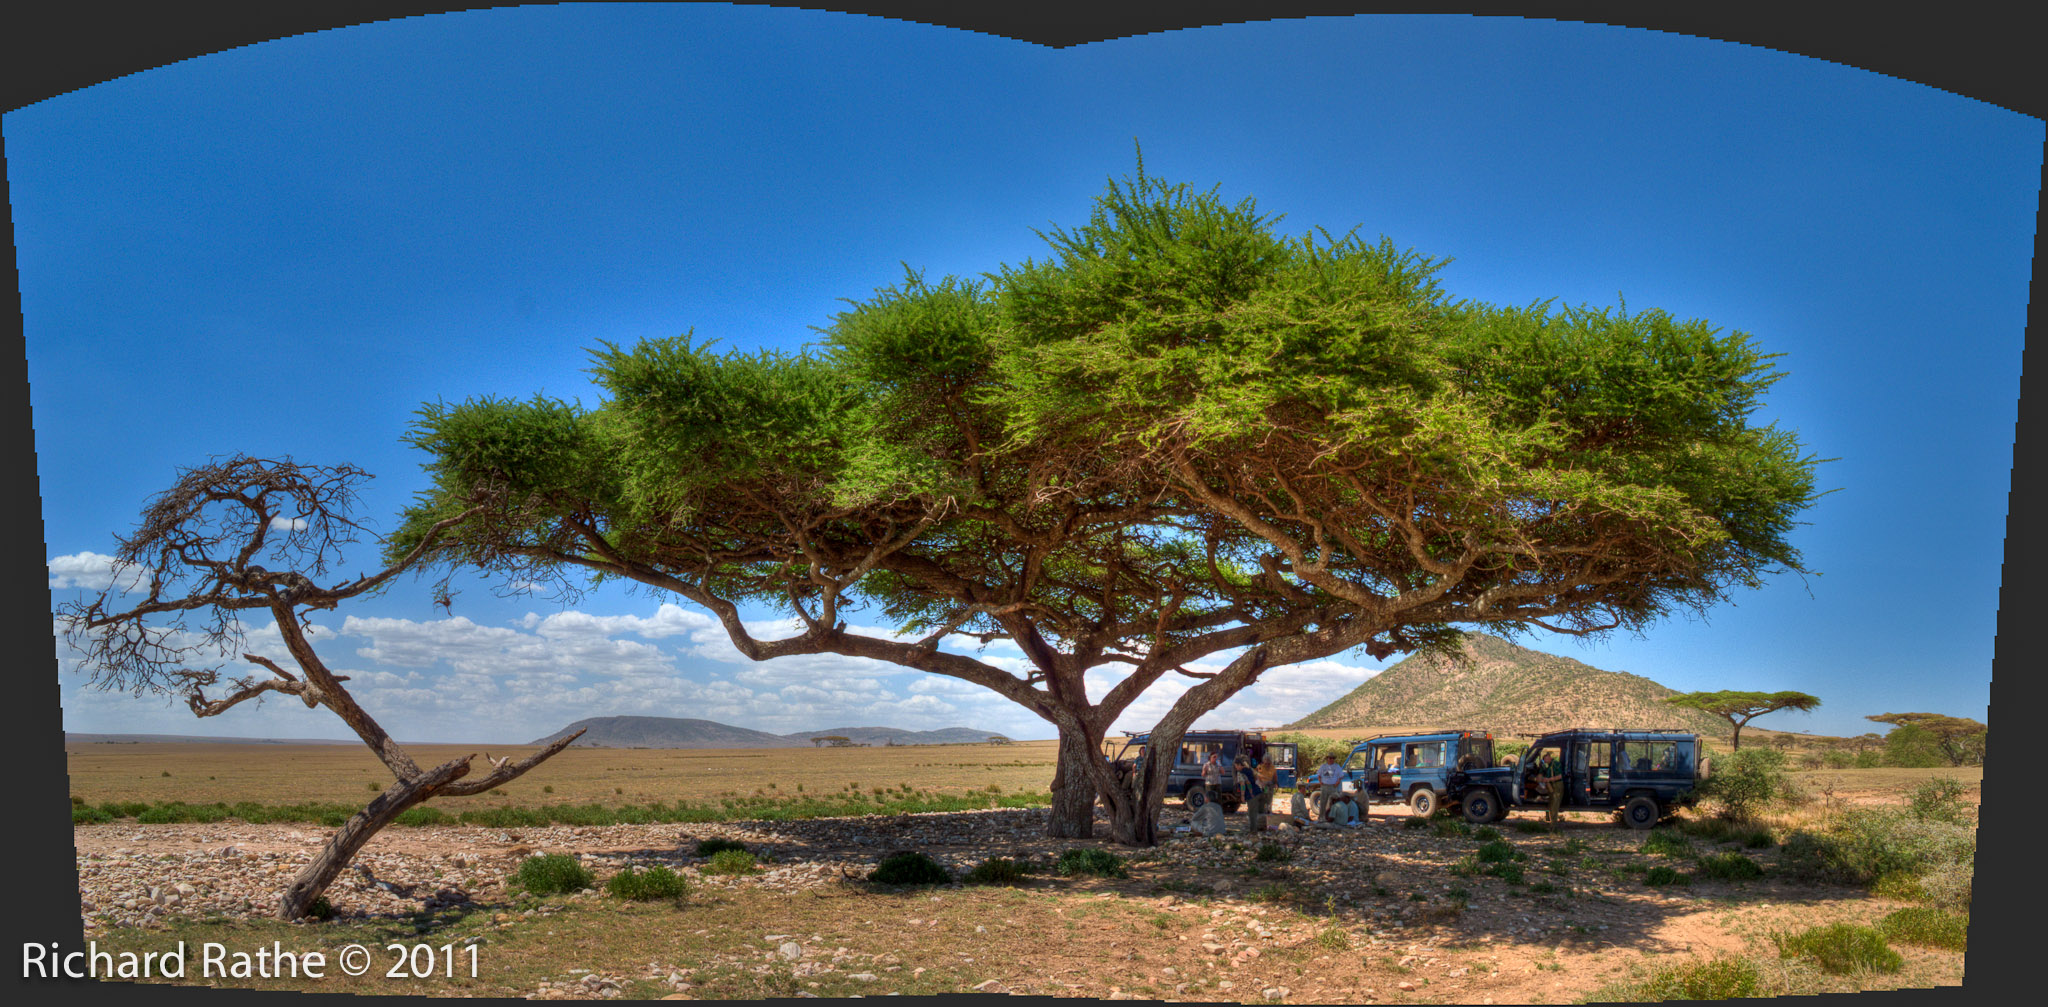 Lunch Under an Acacia Tree